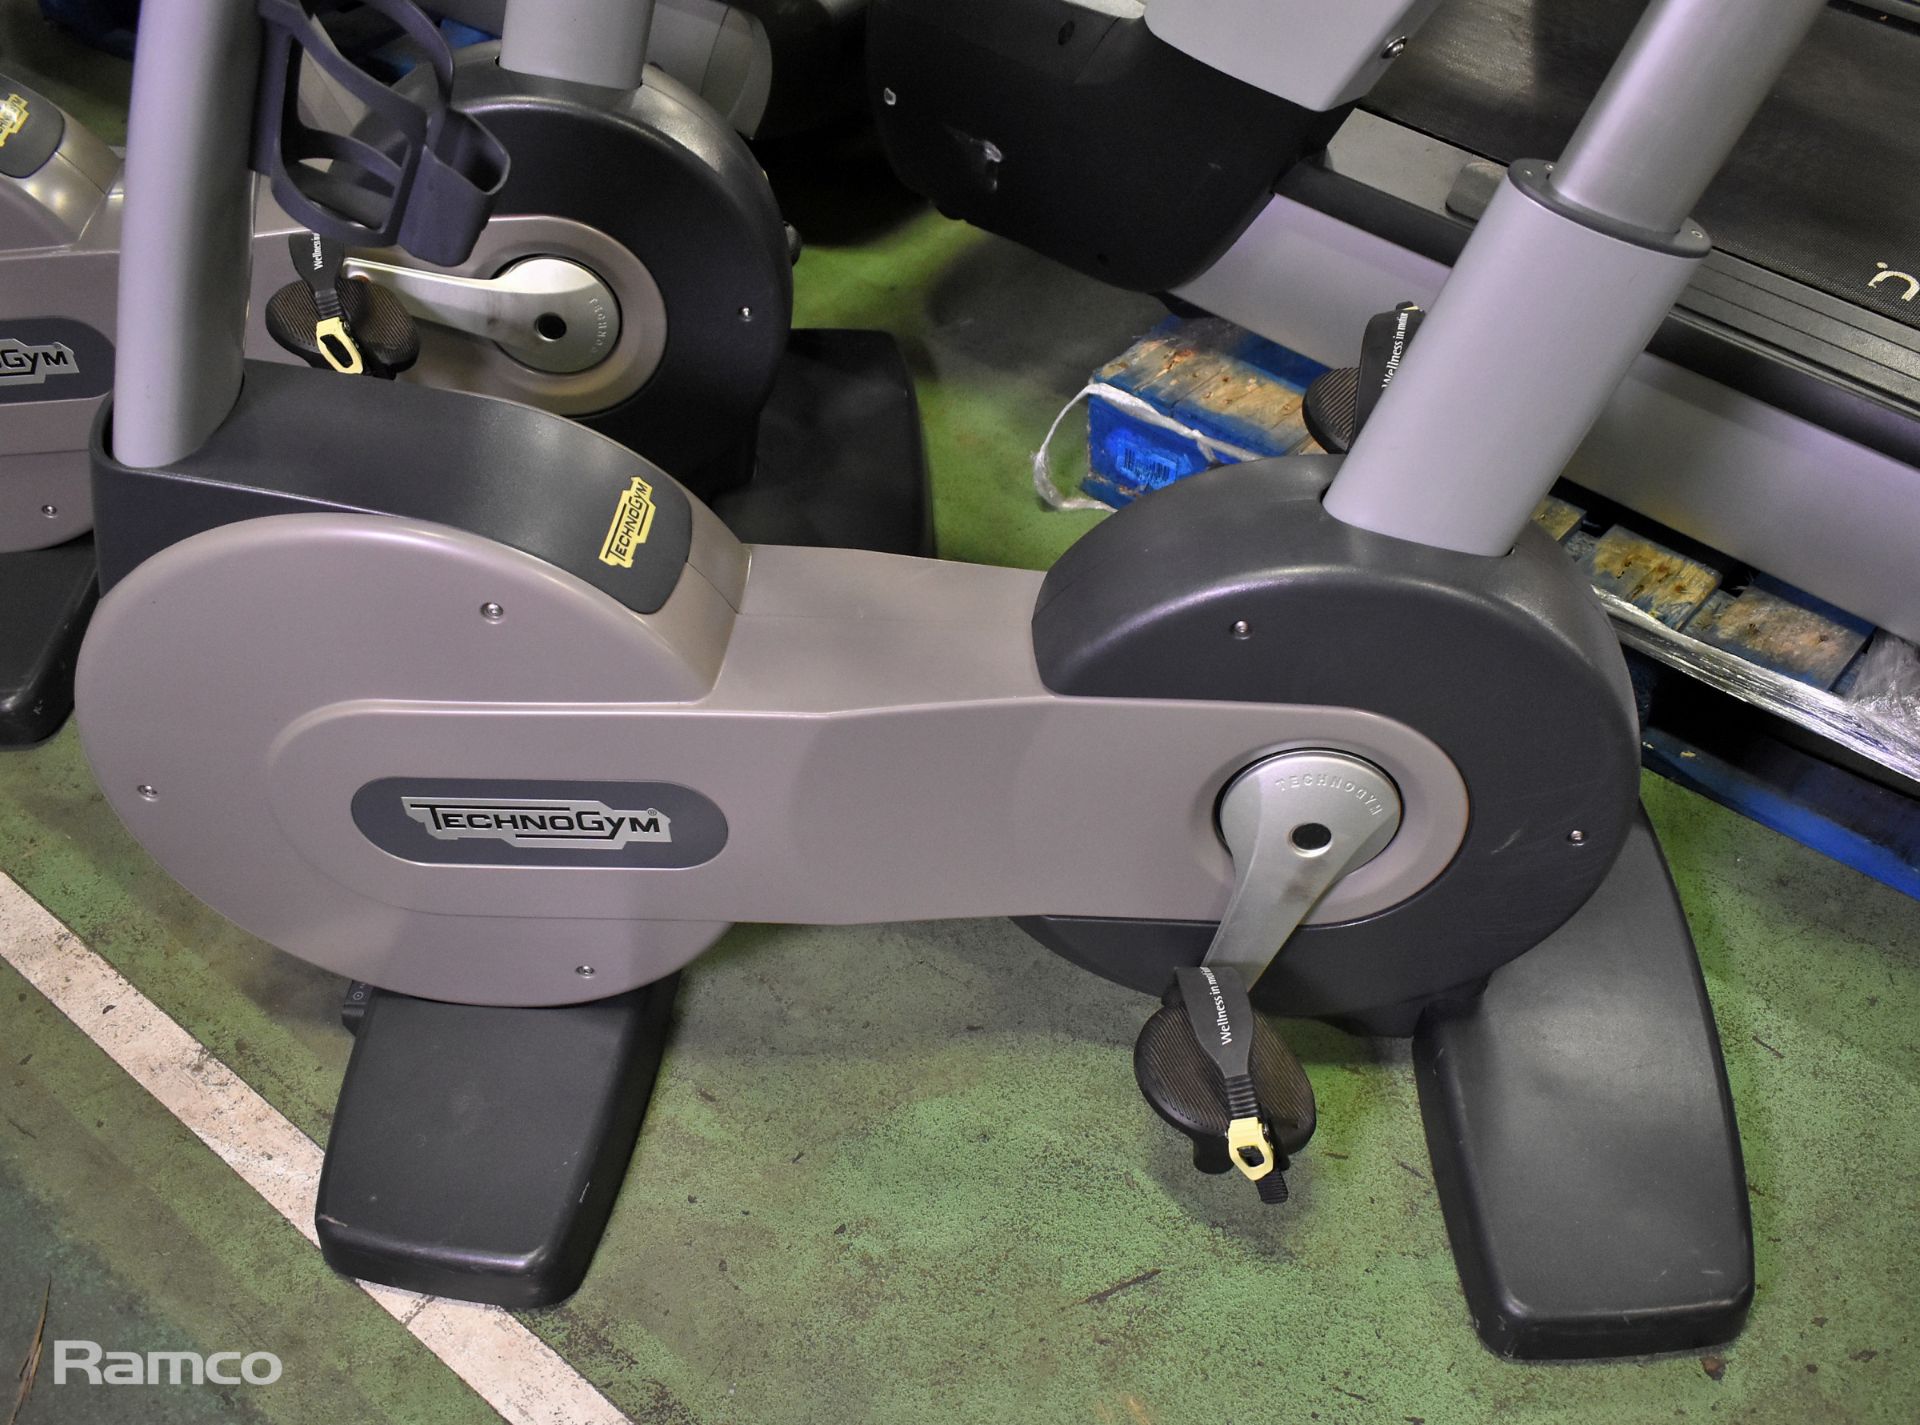 TechnoGym static exercise bike - W 550 x D 1210 x H 1380mm - Image 2 of 6